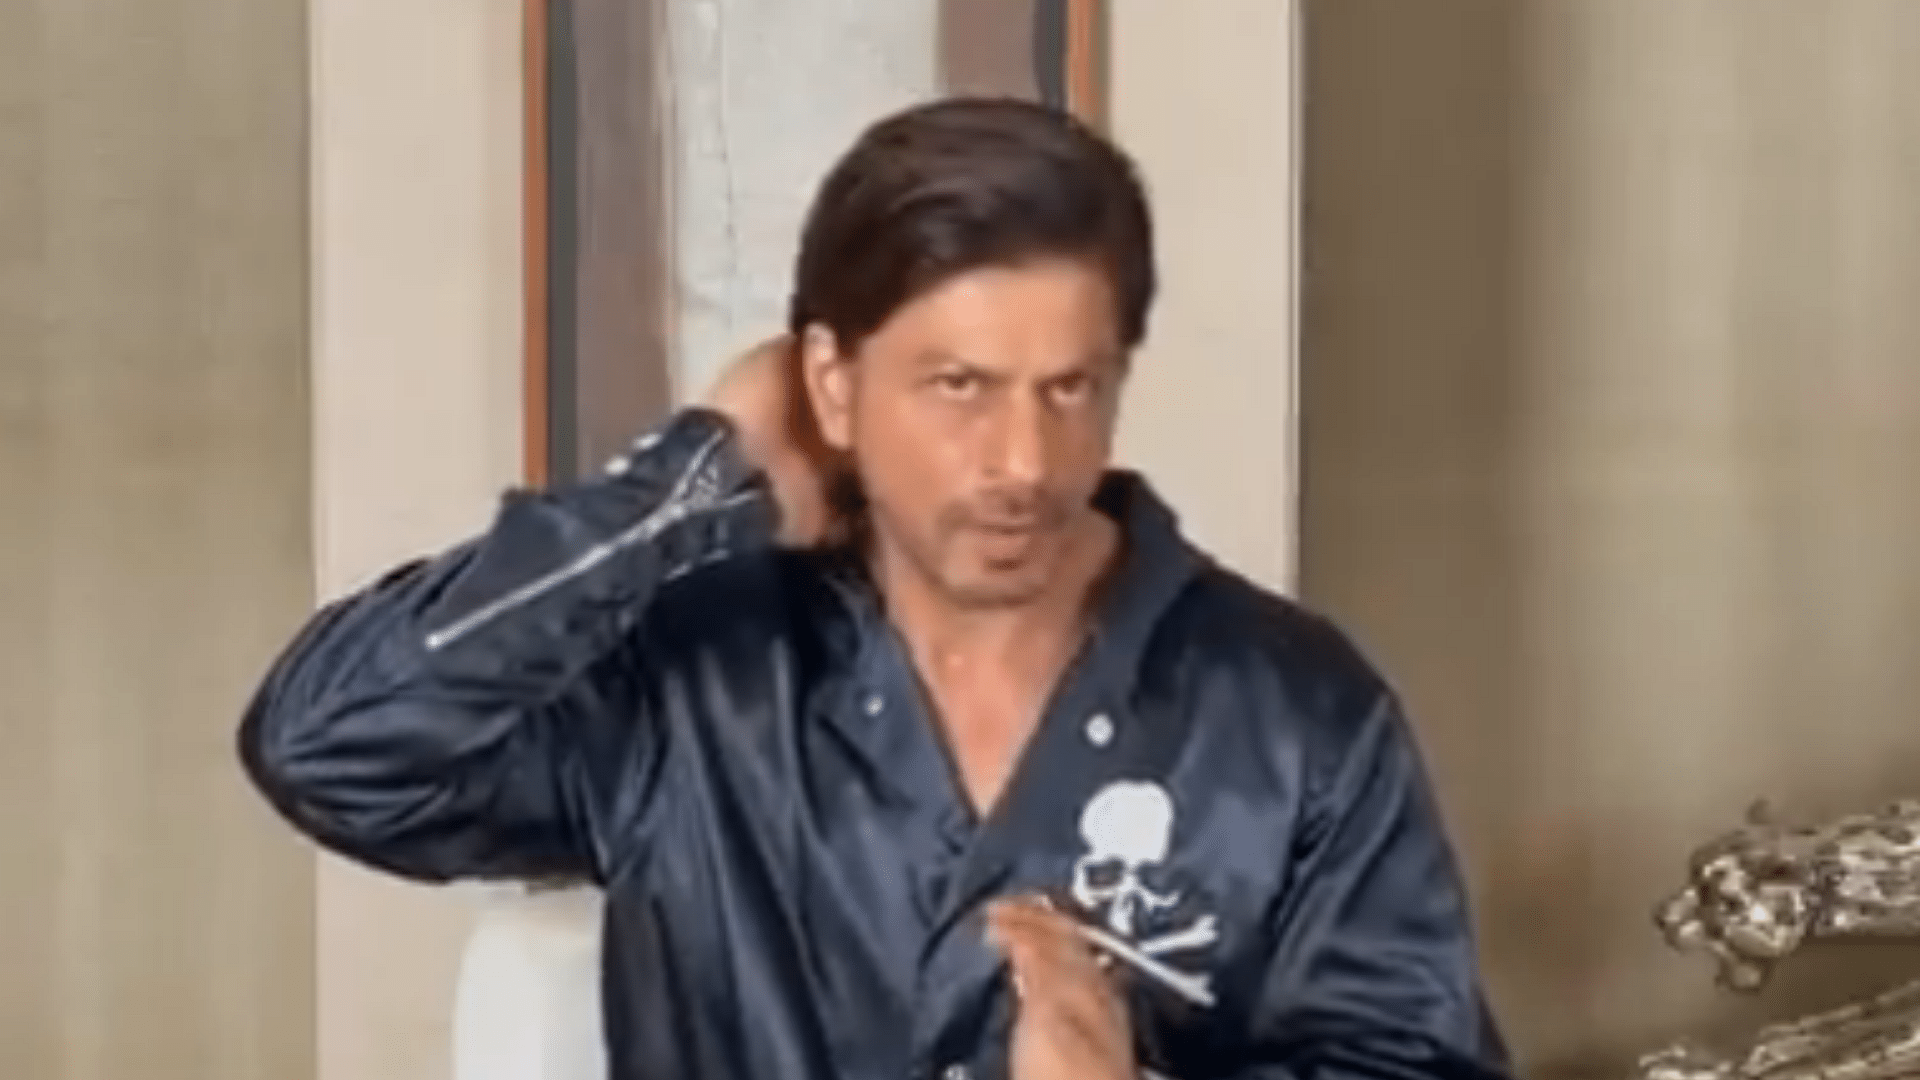 Shah Rukh Khan recorded a video message for his fans for the New Year.